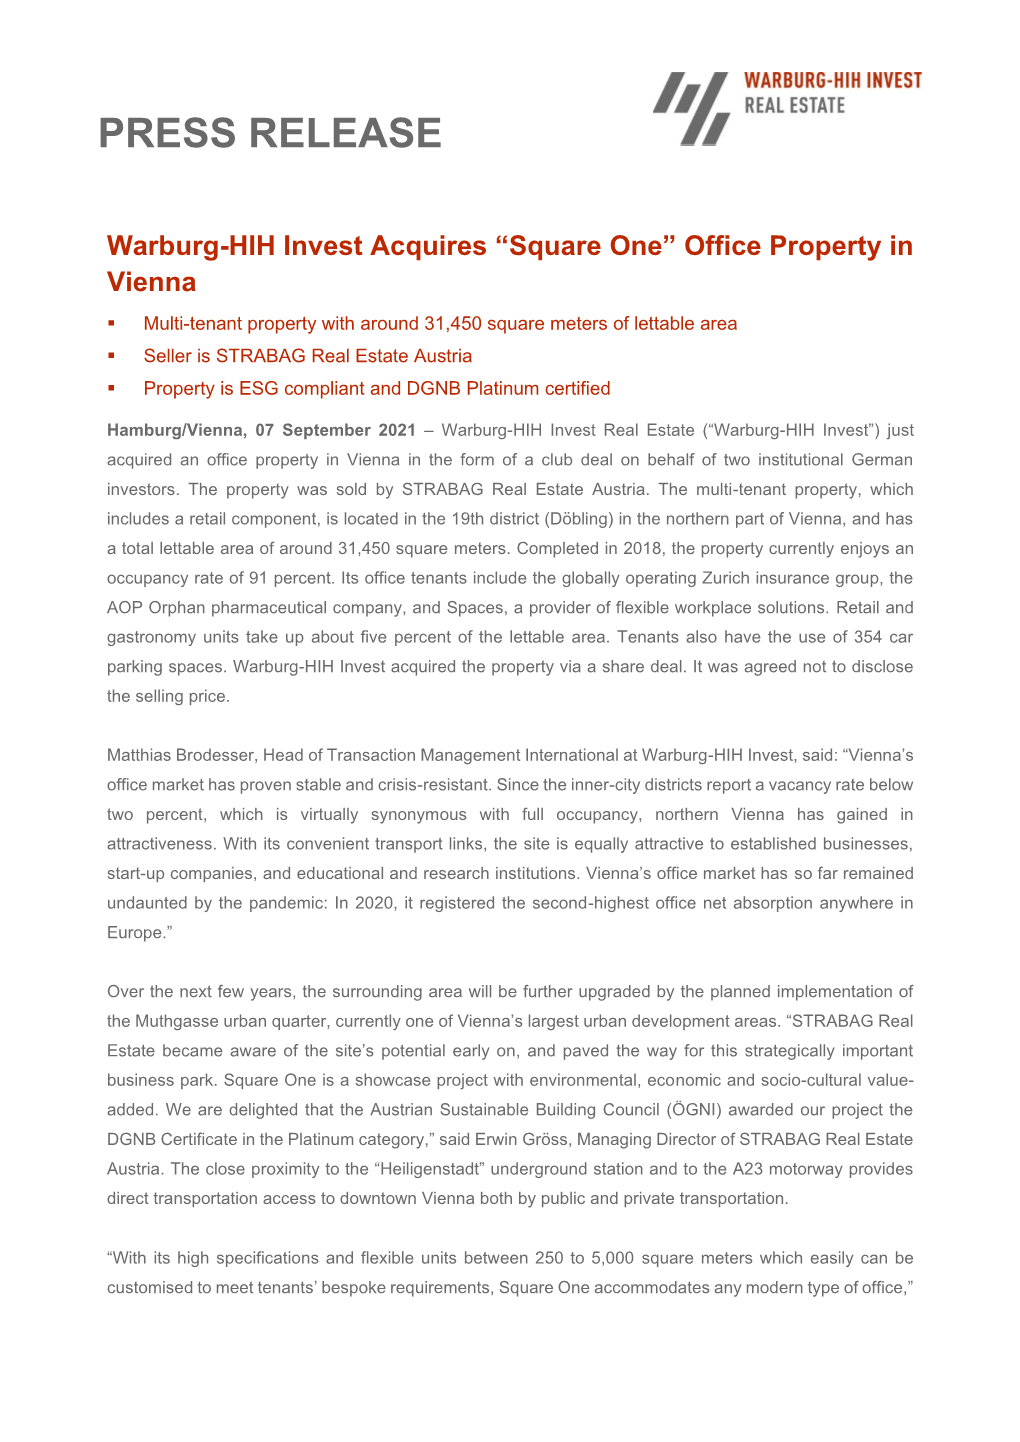 Warburg-HIH Invest Acquires “Square One” Office Property in Vienna